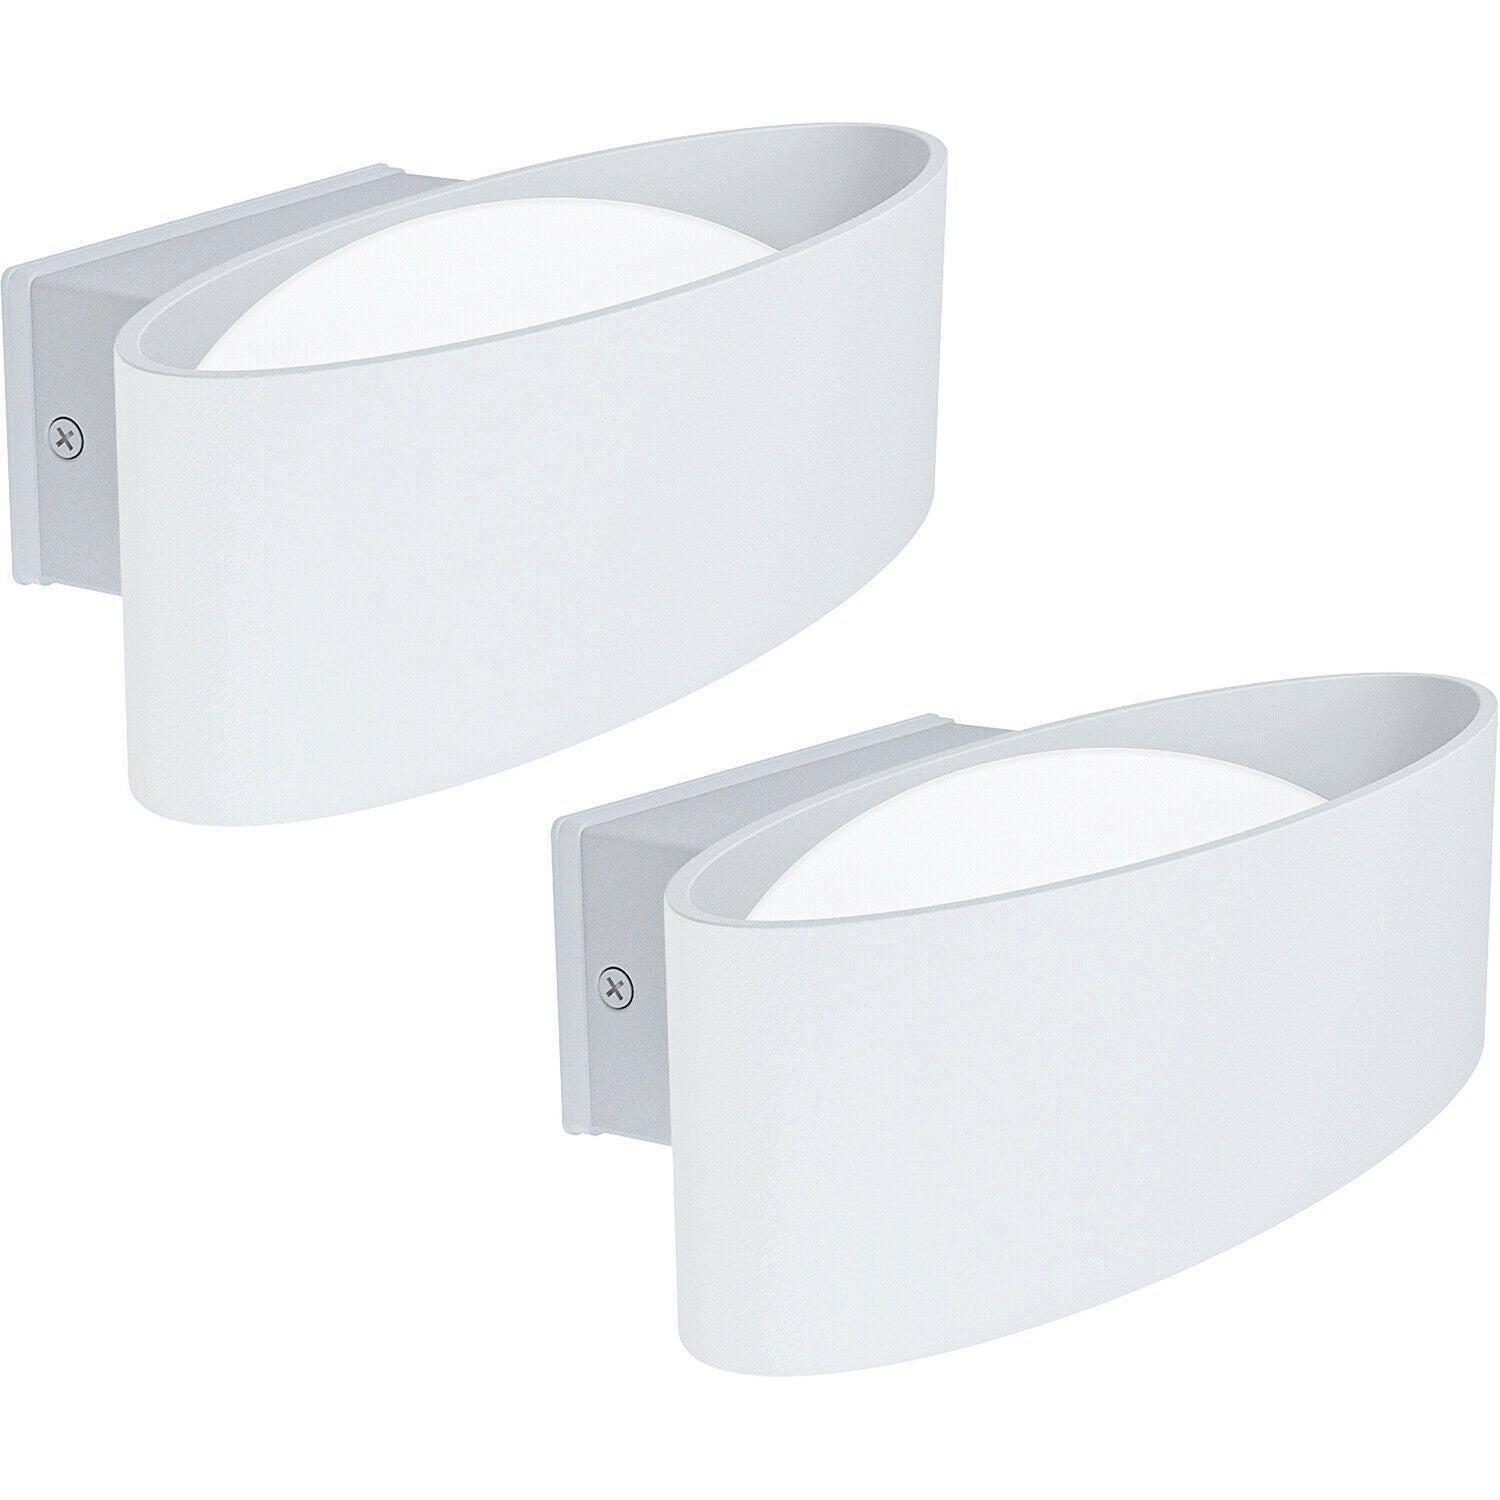 2 PACK IP44 Outdoor Wall Light White Aluminium & Steel 10W LED Porch Lamp - image 1